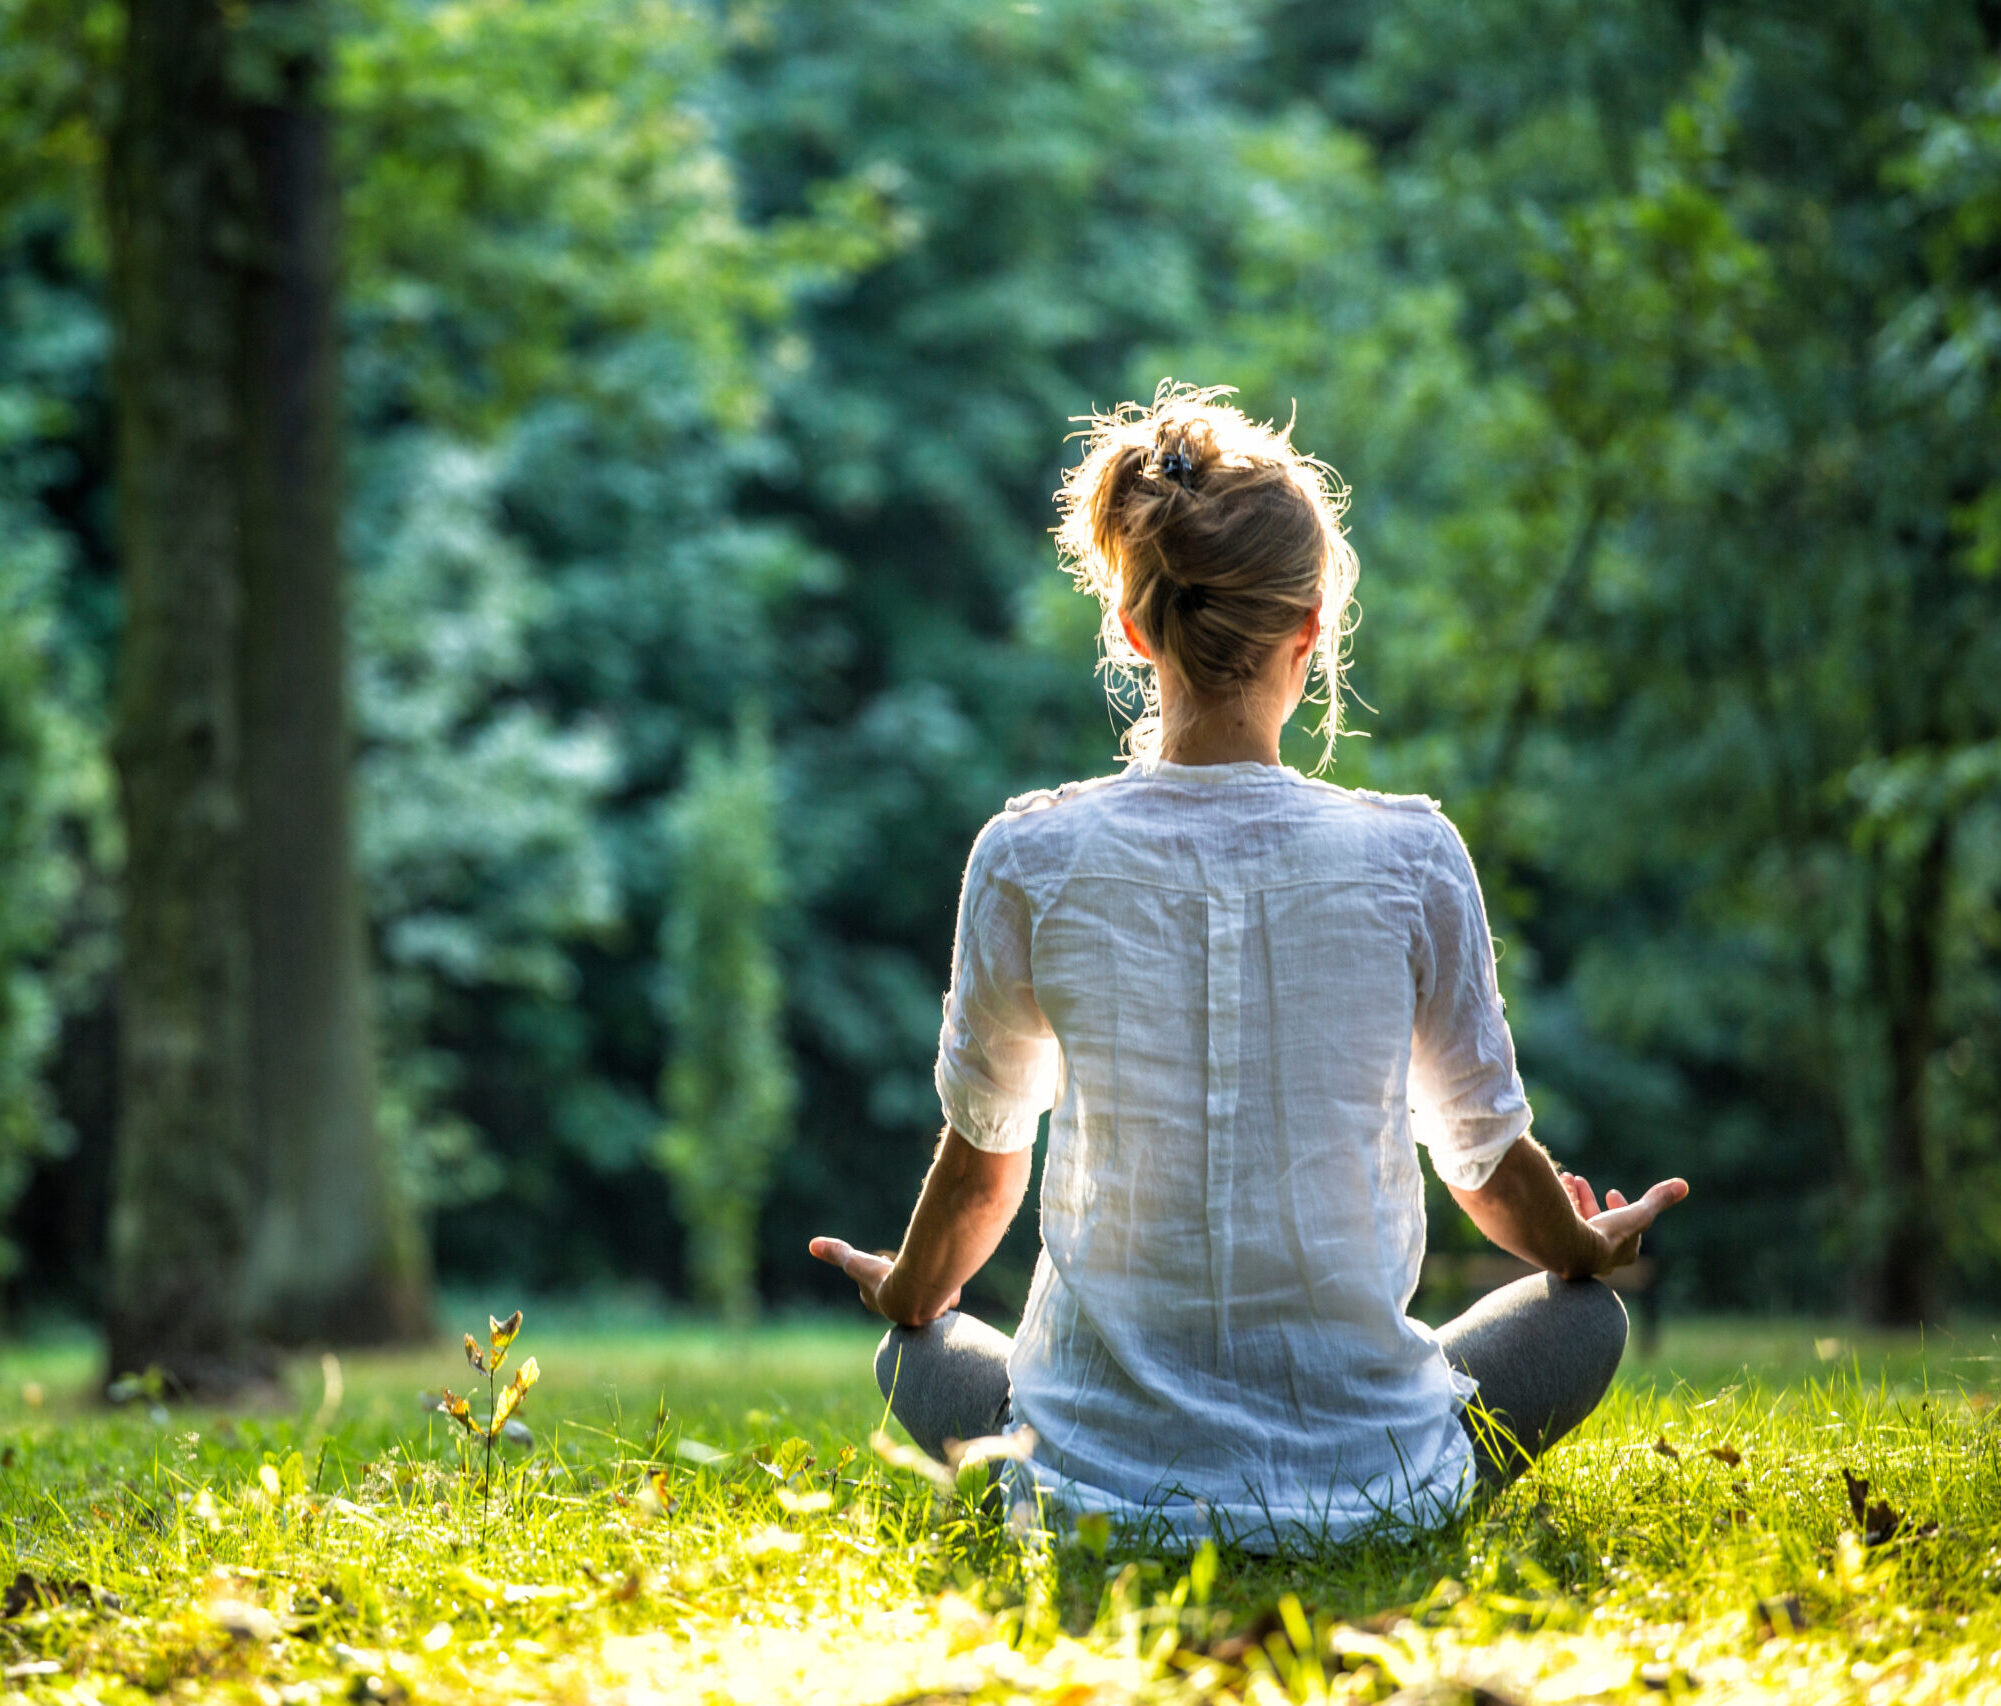 Looking for the Best Way to Improve Your Mental Health? Combine Mindfulness With Exercise